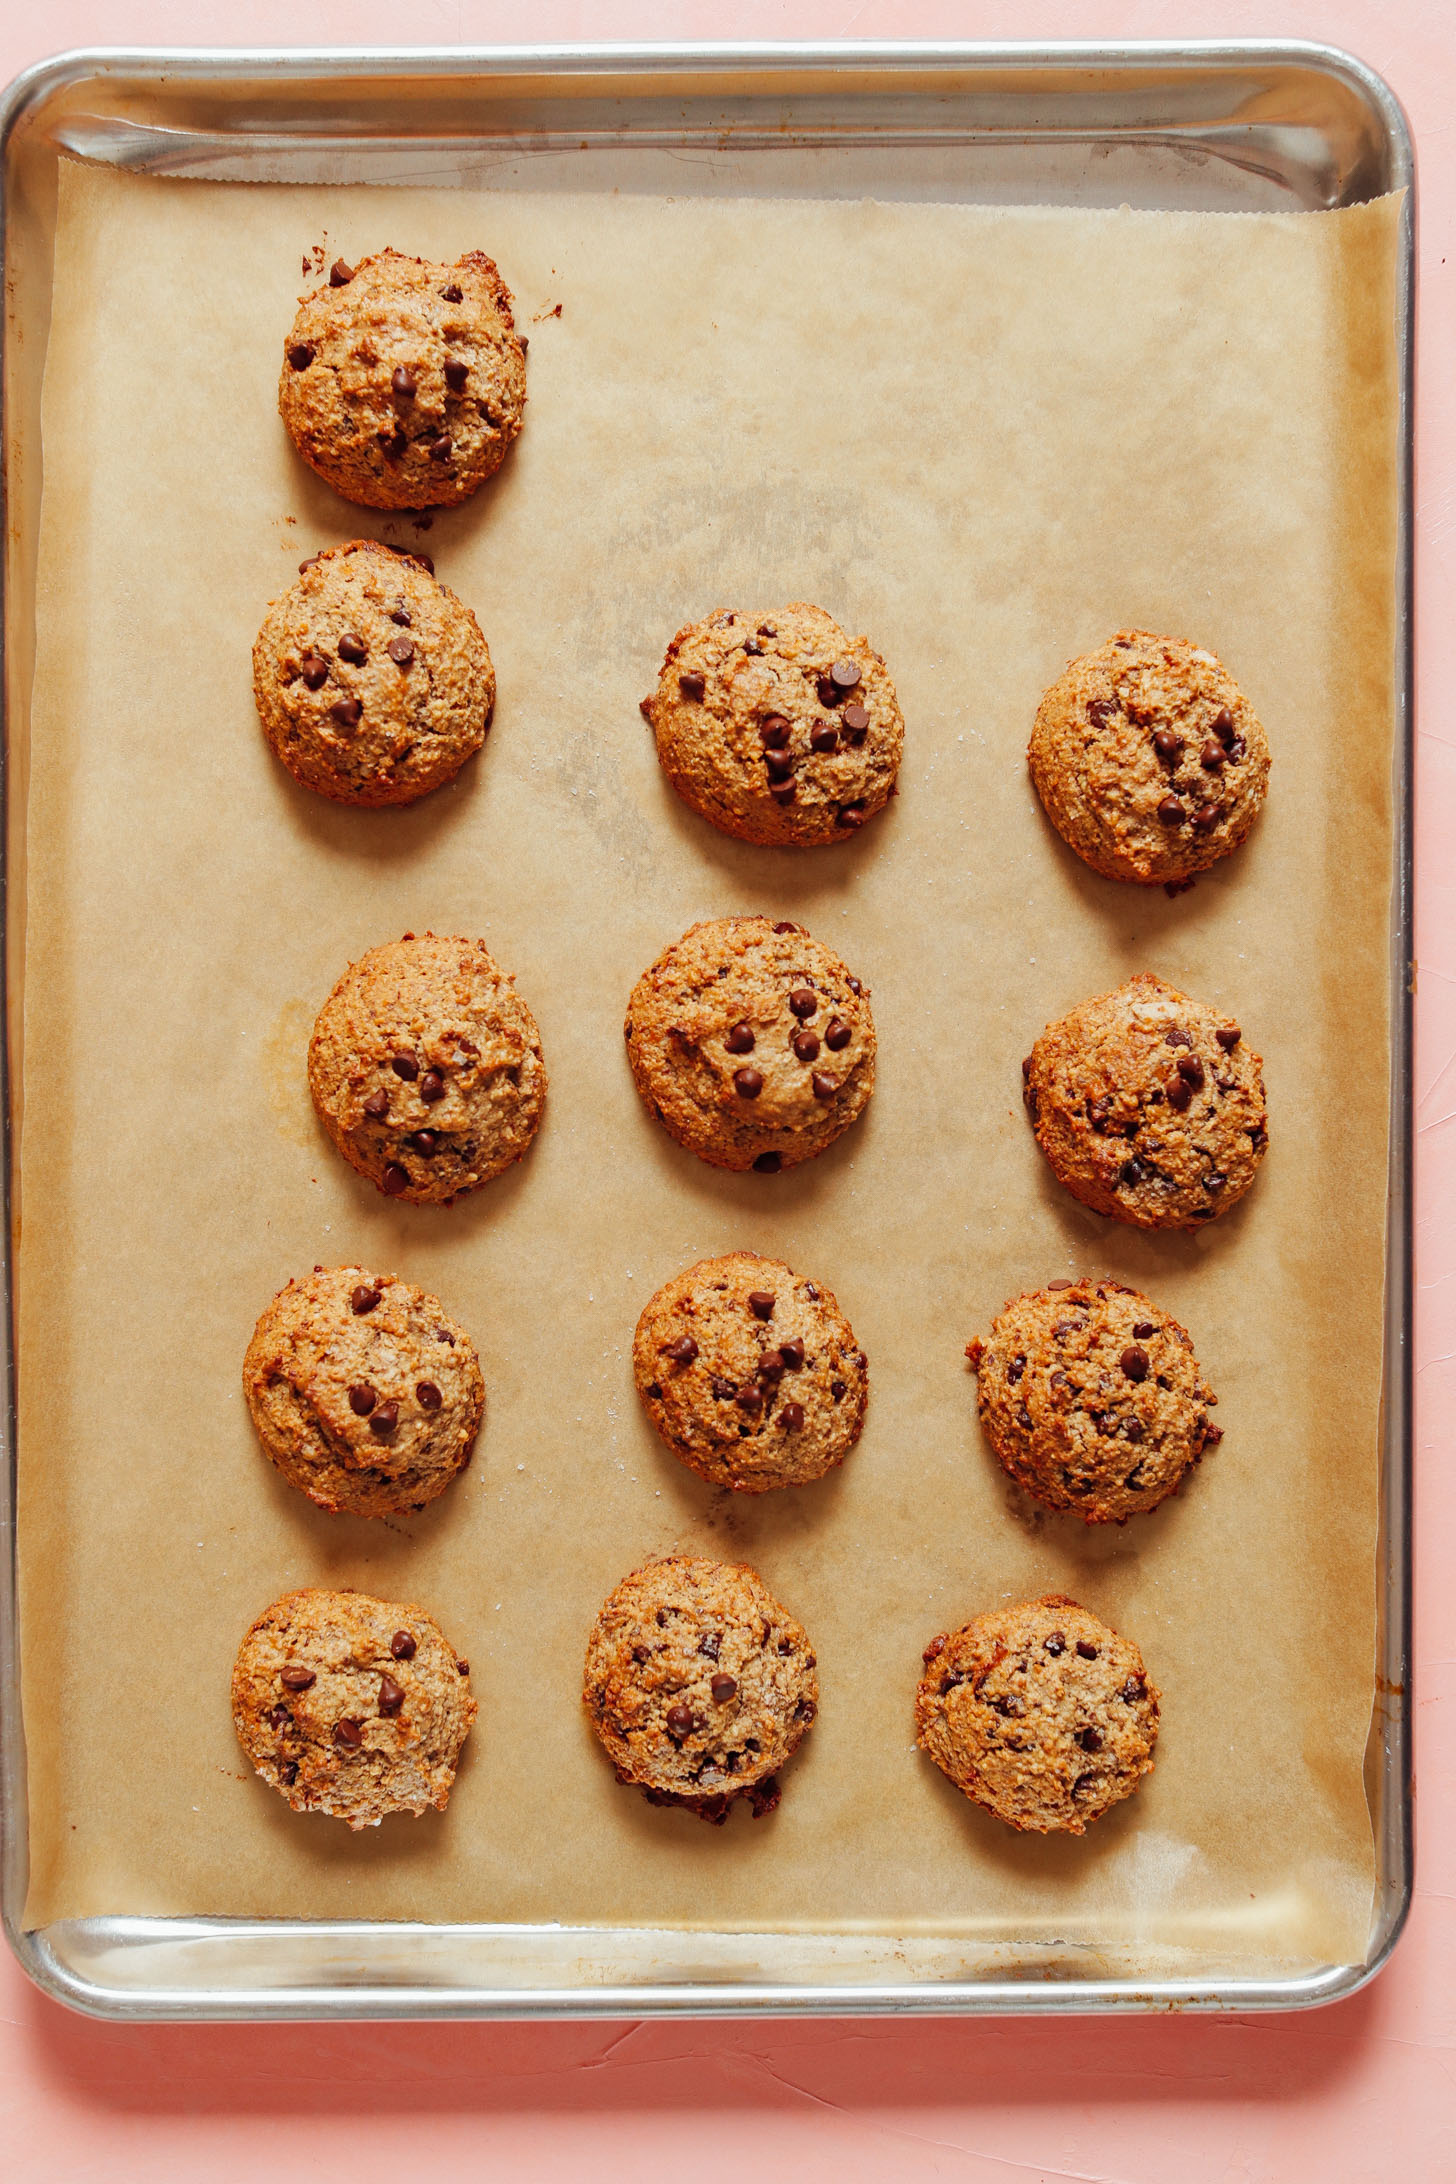 Parchment-lined baking sheet filled with freshly baked 1-Bowl Banana Chocolate Chip Cookies